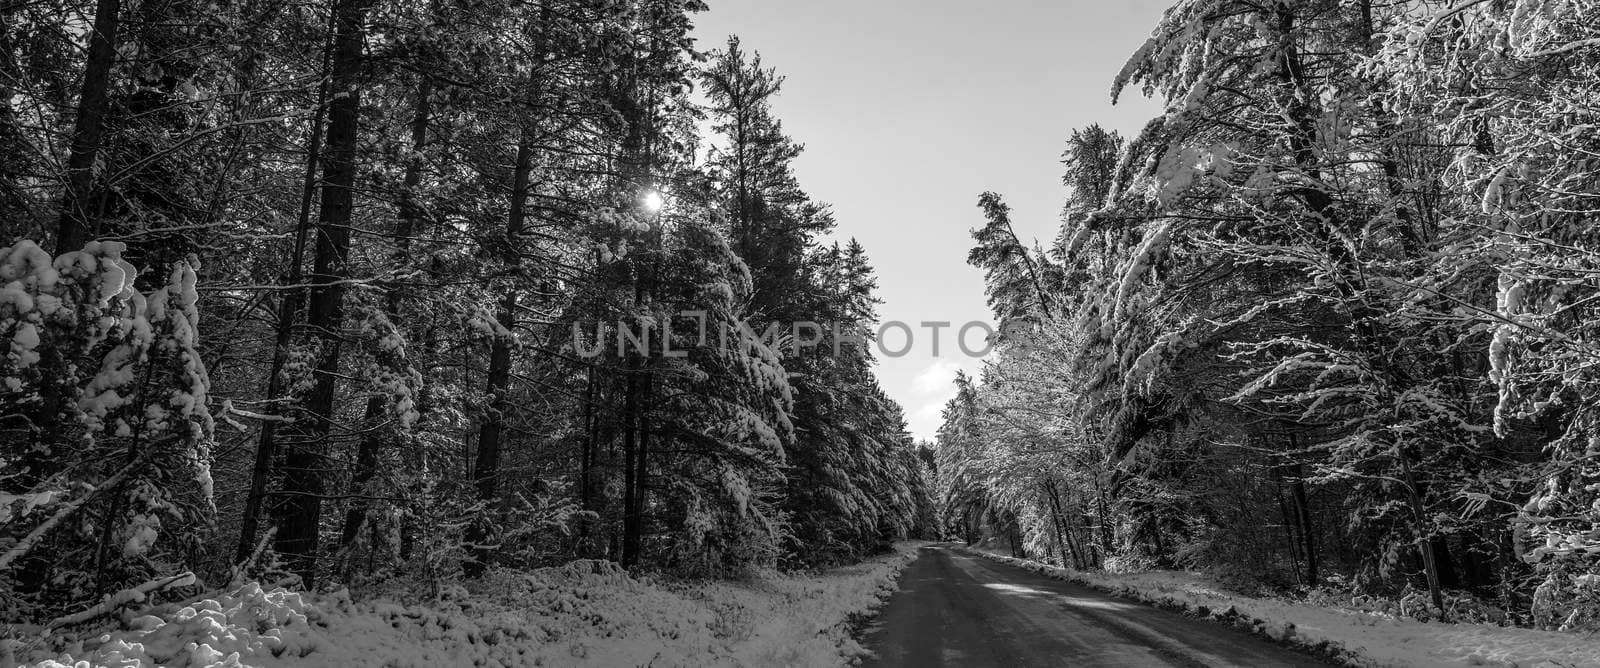 Snow covered pines and sun piercing through shadowed forests along rural roads.  Sunny winter morning tall pine forests covered in fresh fallen snow.